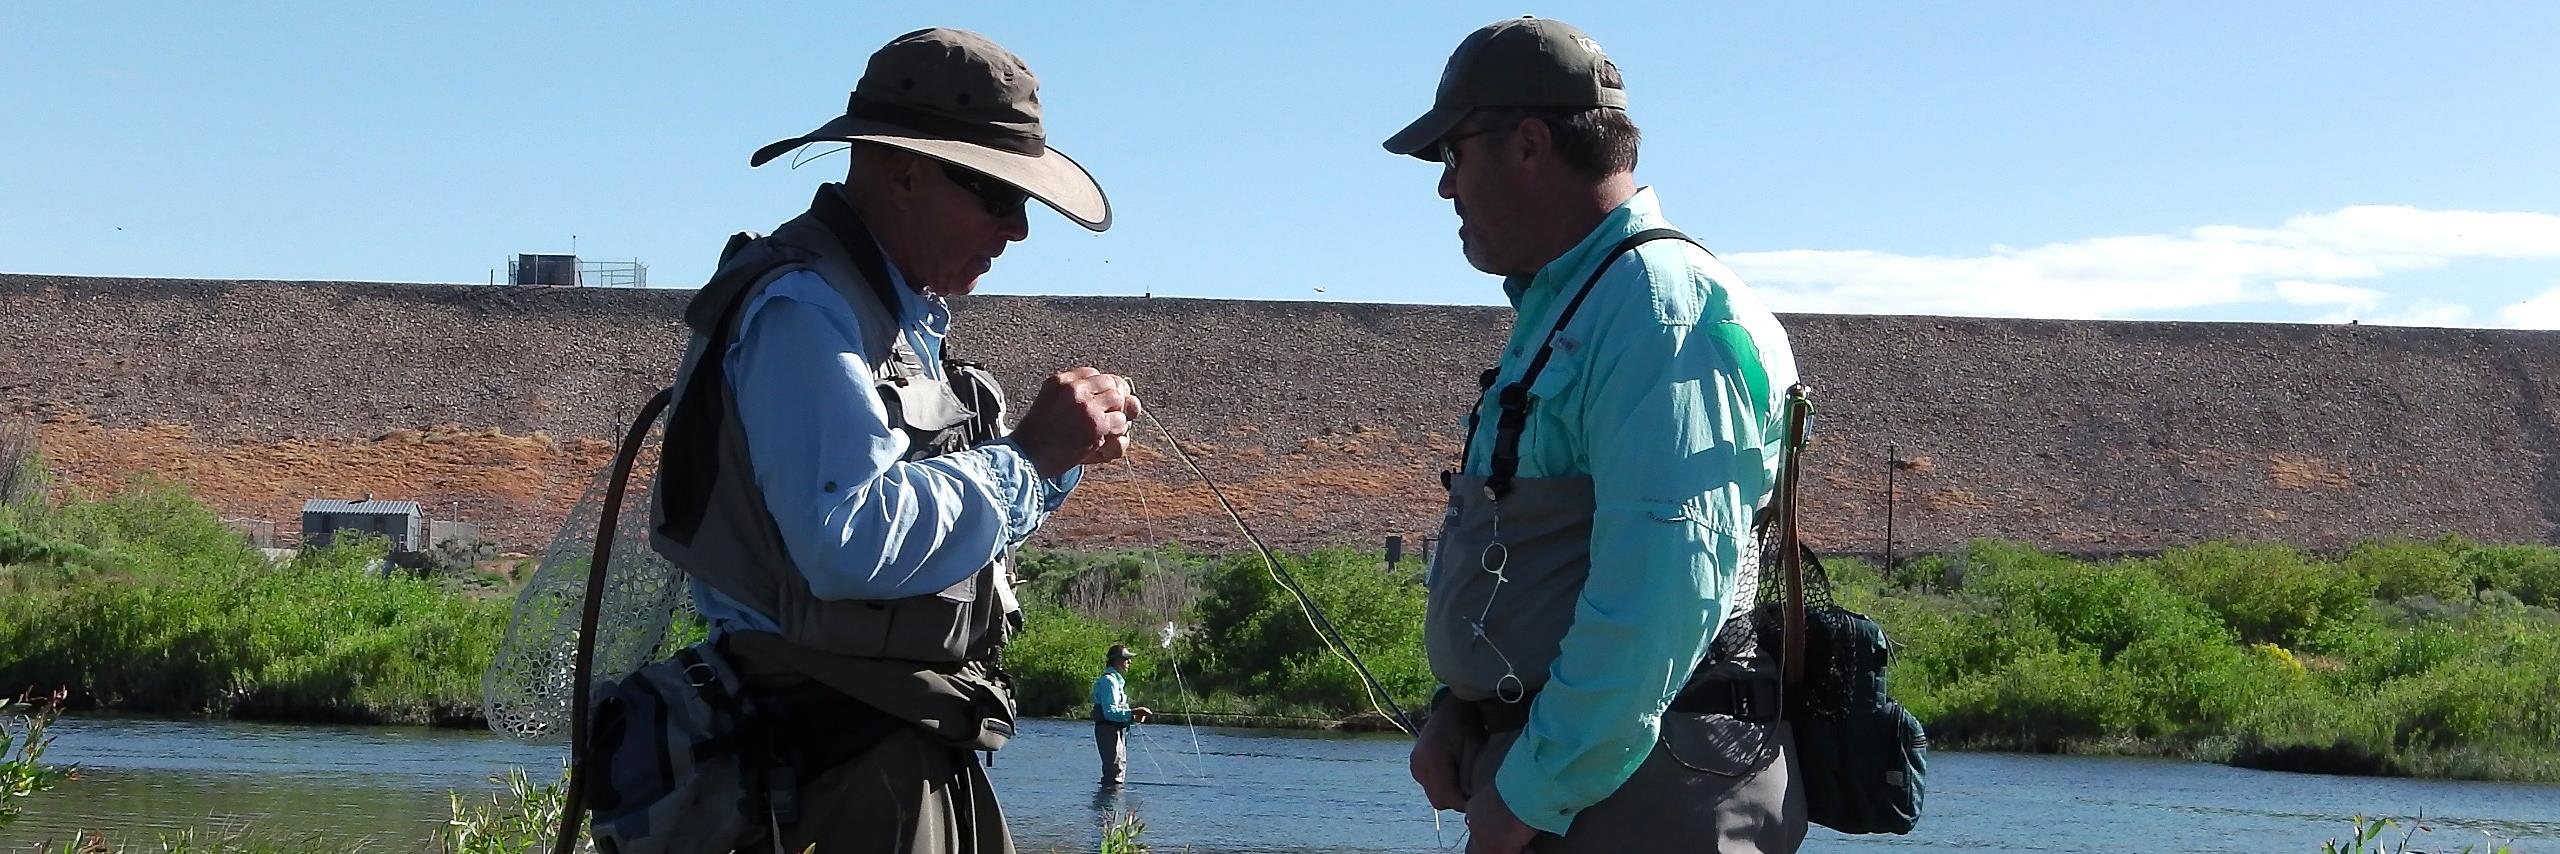 https://www.flyfishingwesternwyoming.com/wp-content/uploads/2018/05/why-does-a-guide-charge-so-much-fly-fishing-Copy.jpg